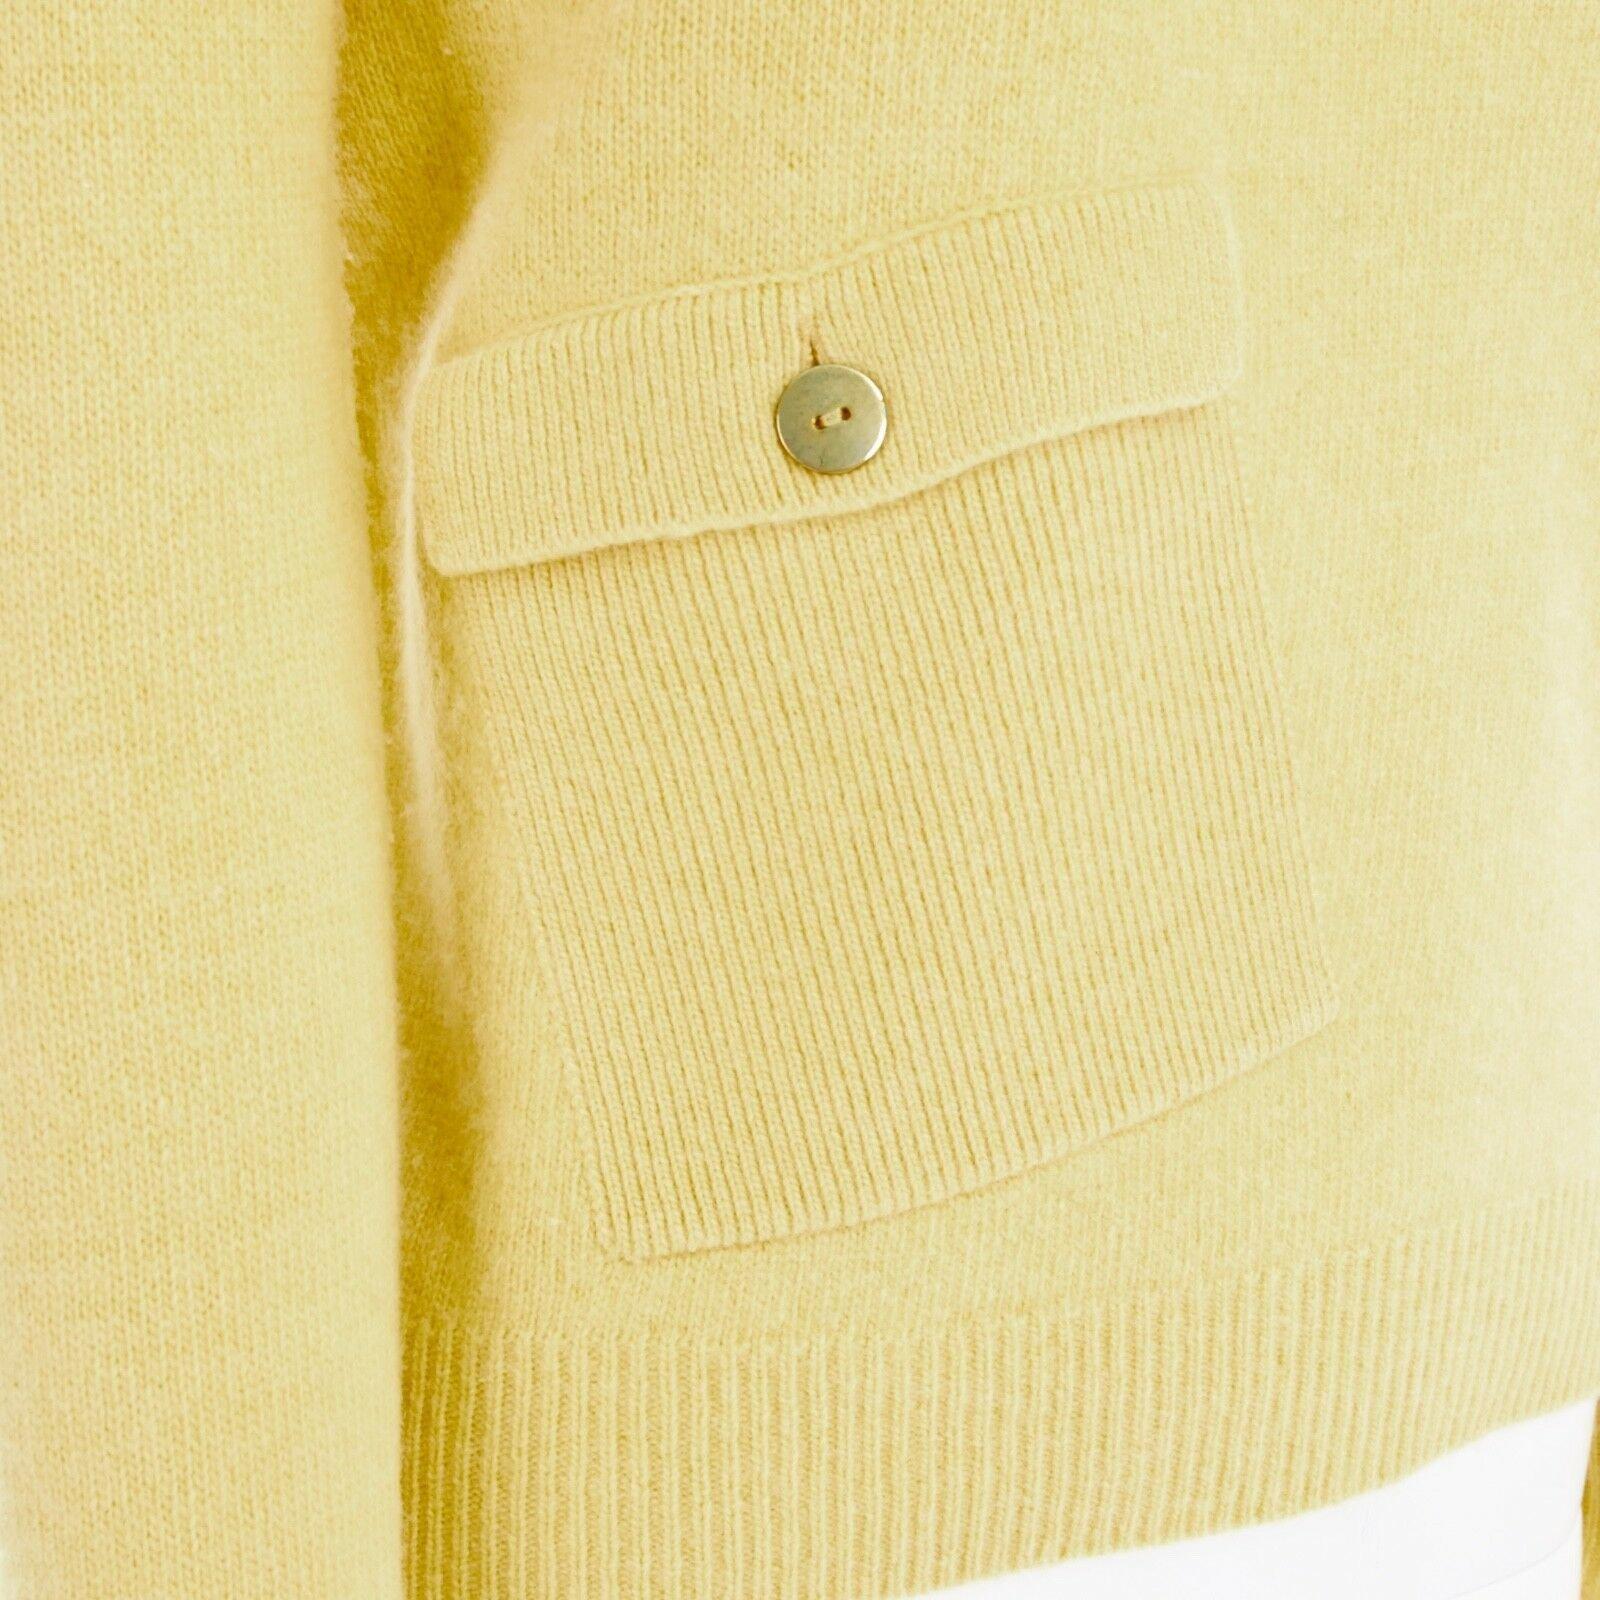 MAX & CO. MAX MARA 100% wool canary yellow patch pocket sweater top S 1